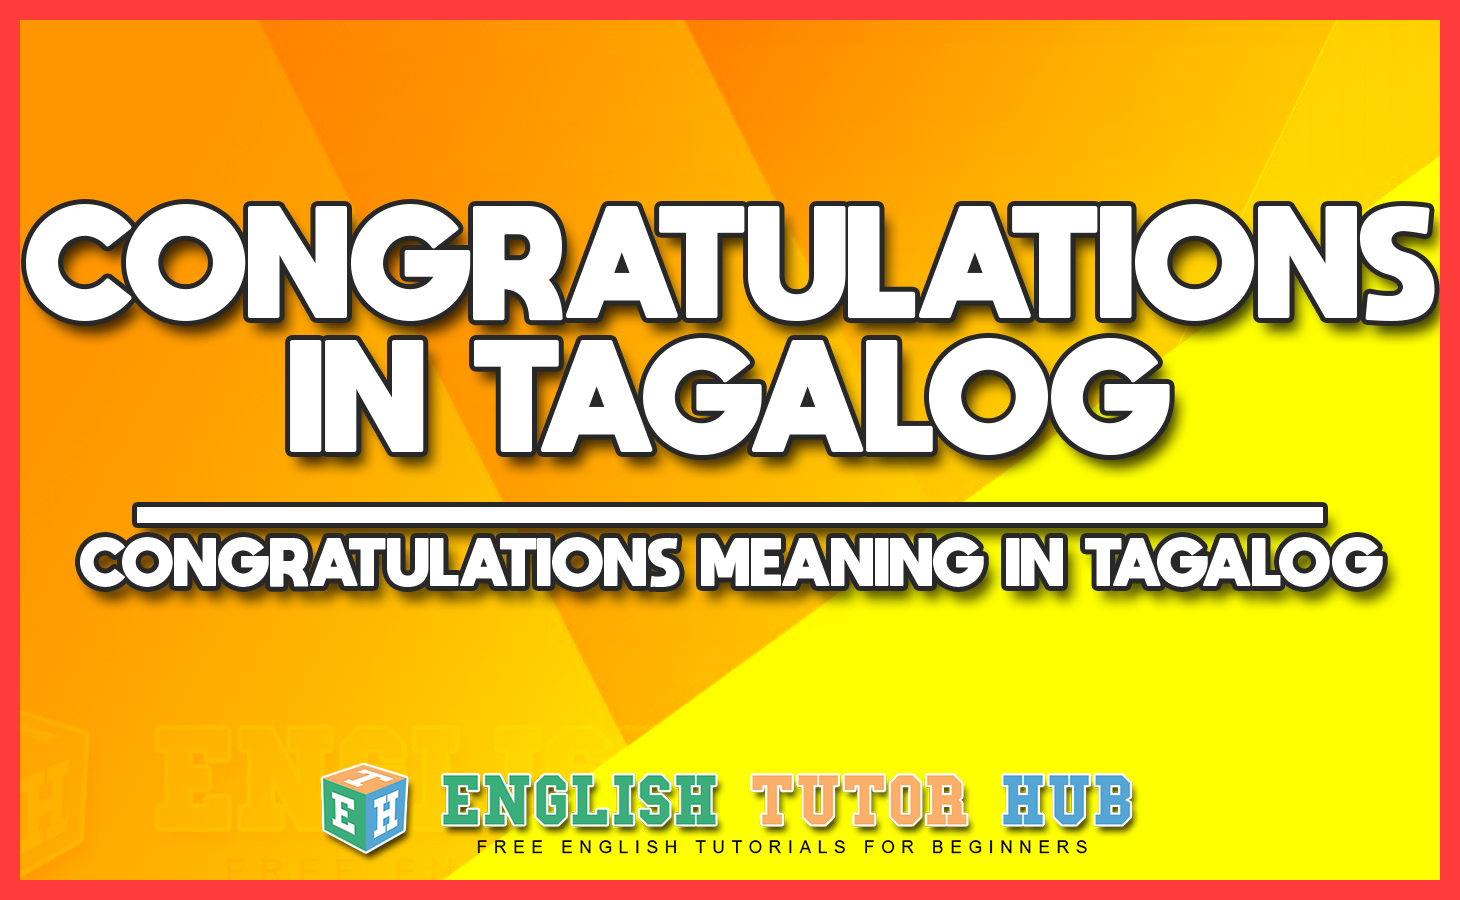 CONGRATULATIONS IN TAGALOG - CONGRATULATIONS MEANING IN TAGALOG